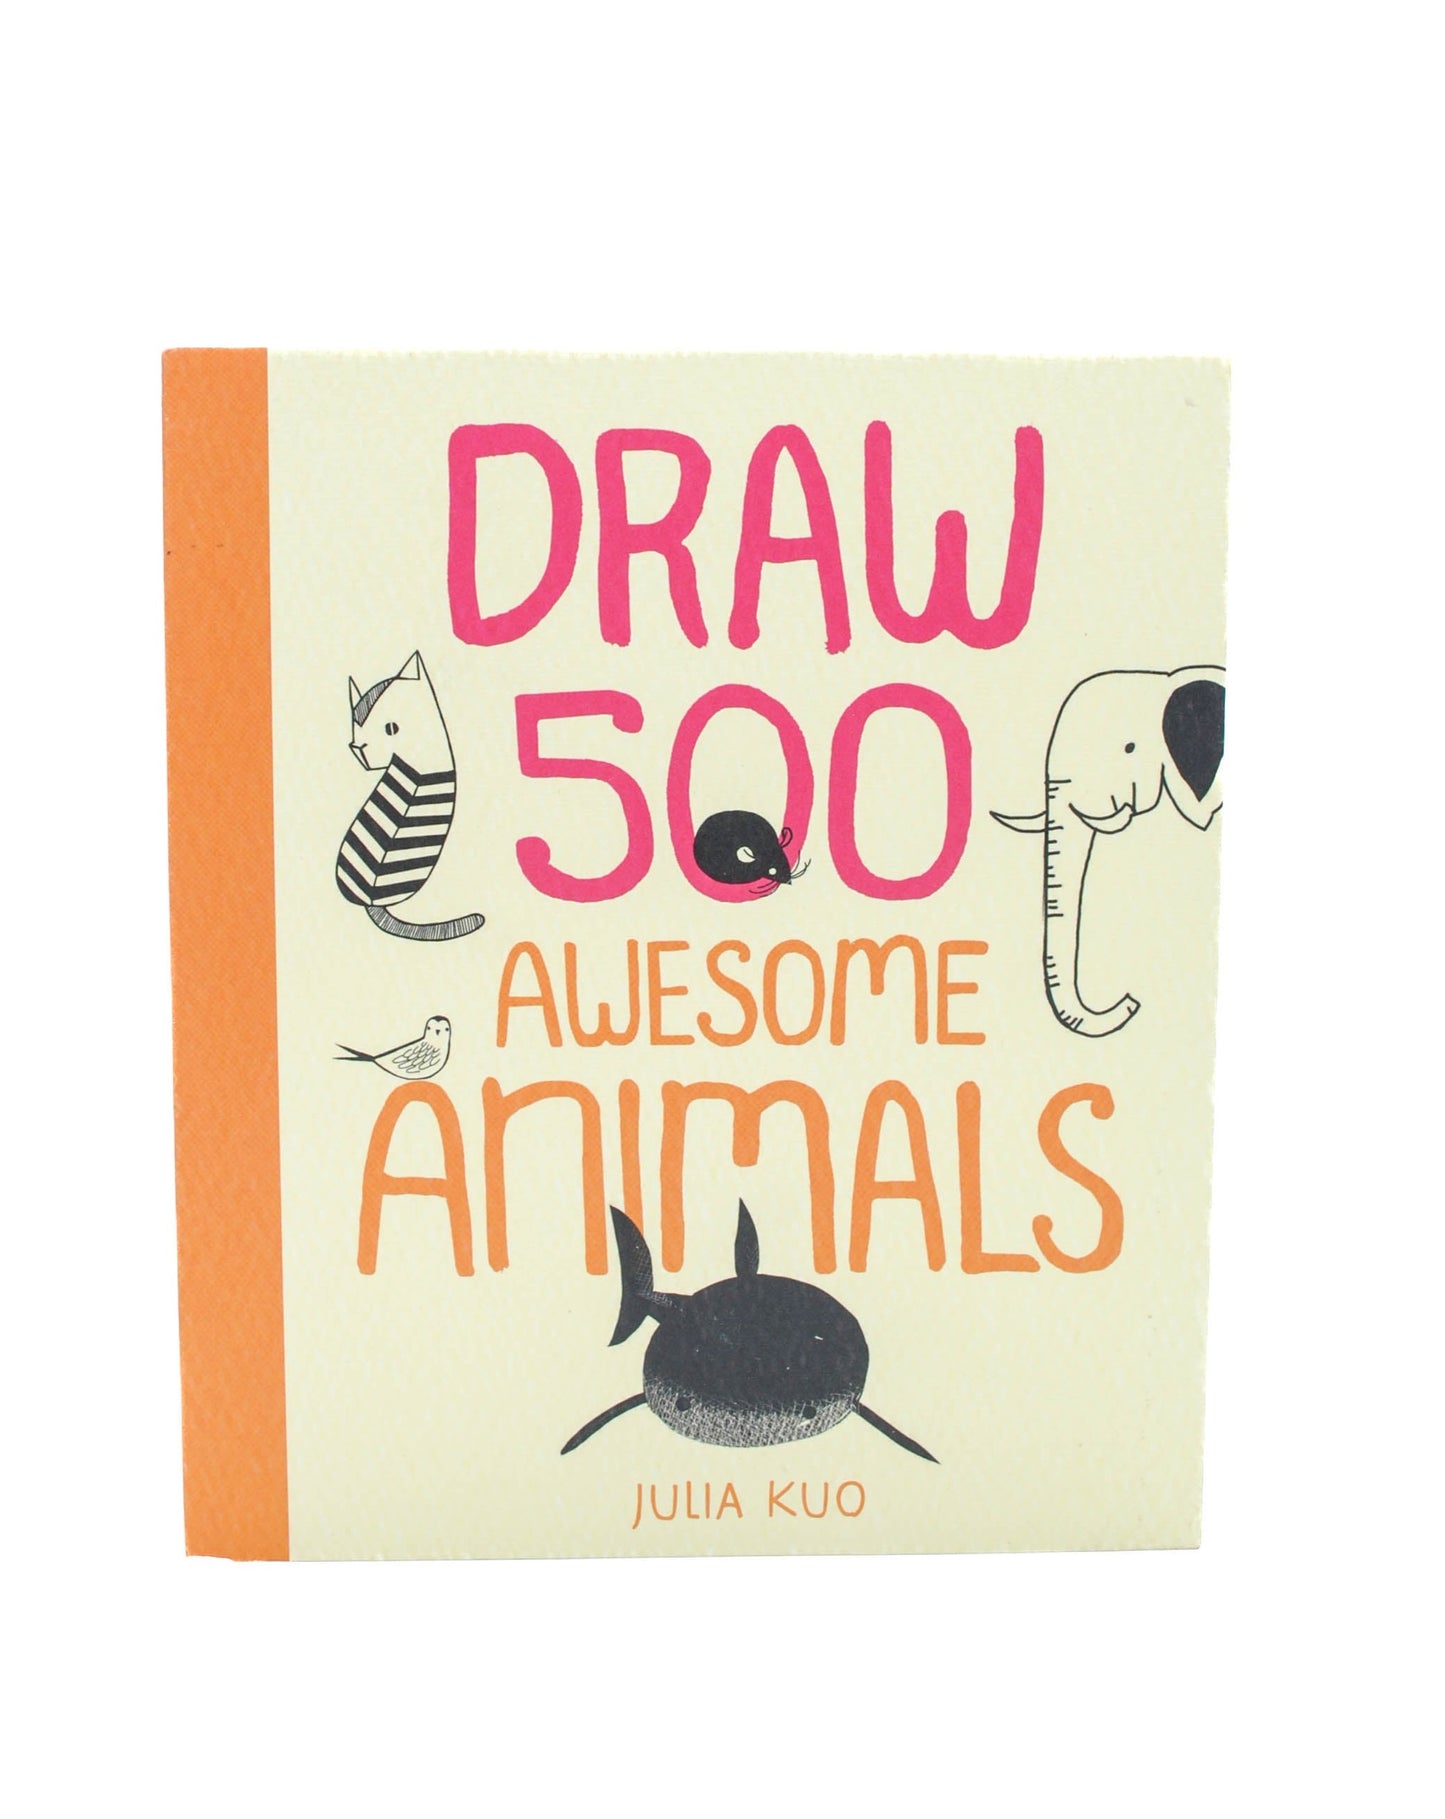 Draw 500 Awesome Animals: A Sketchbook for Artists, Designers, and Doodlers